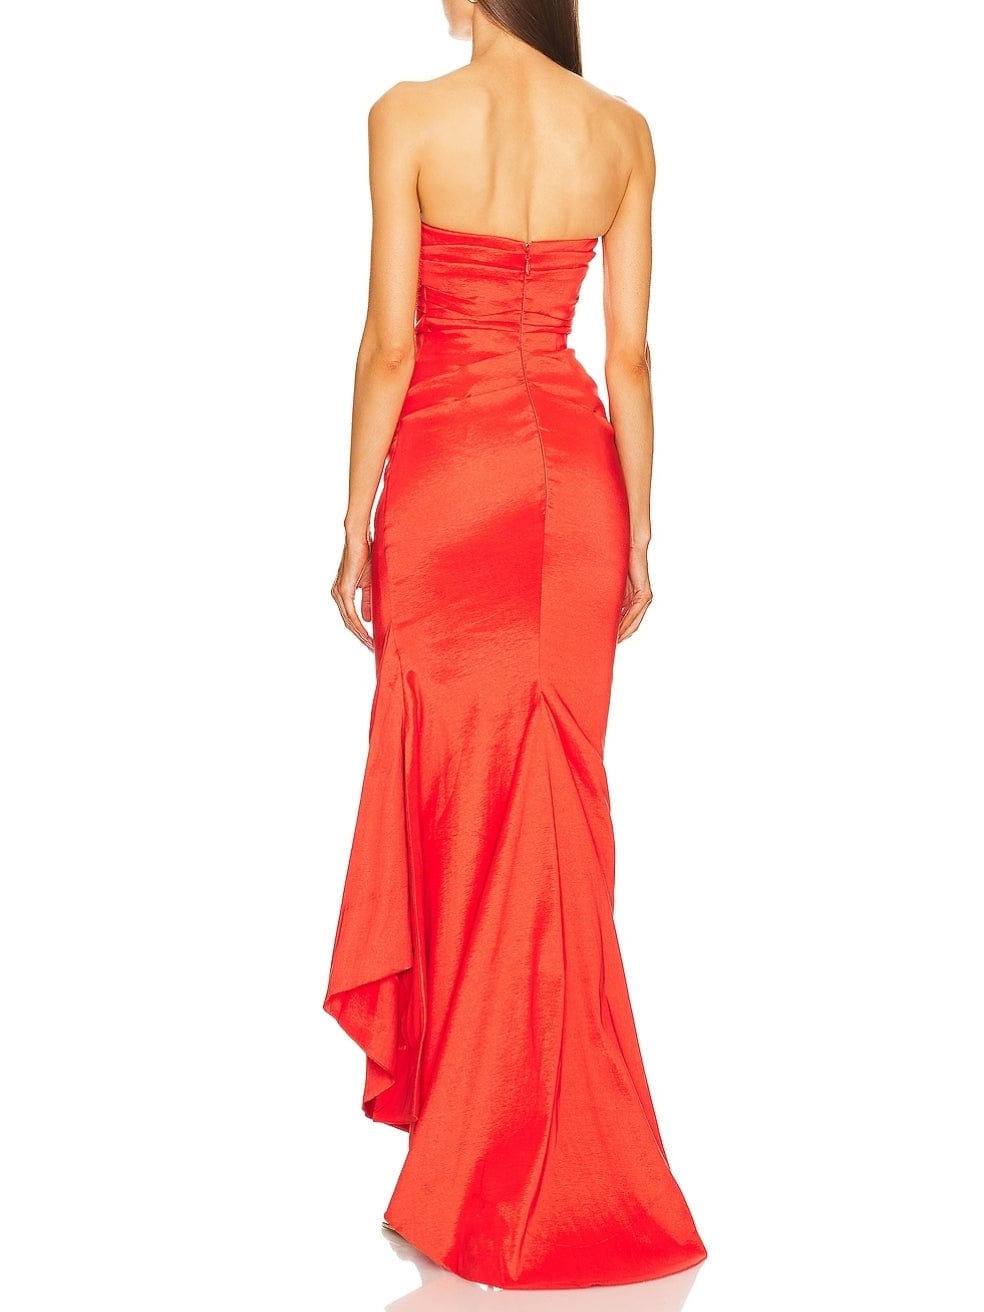 Bette Gown in Red Orange